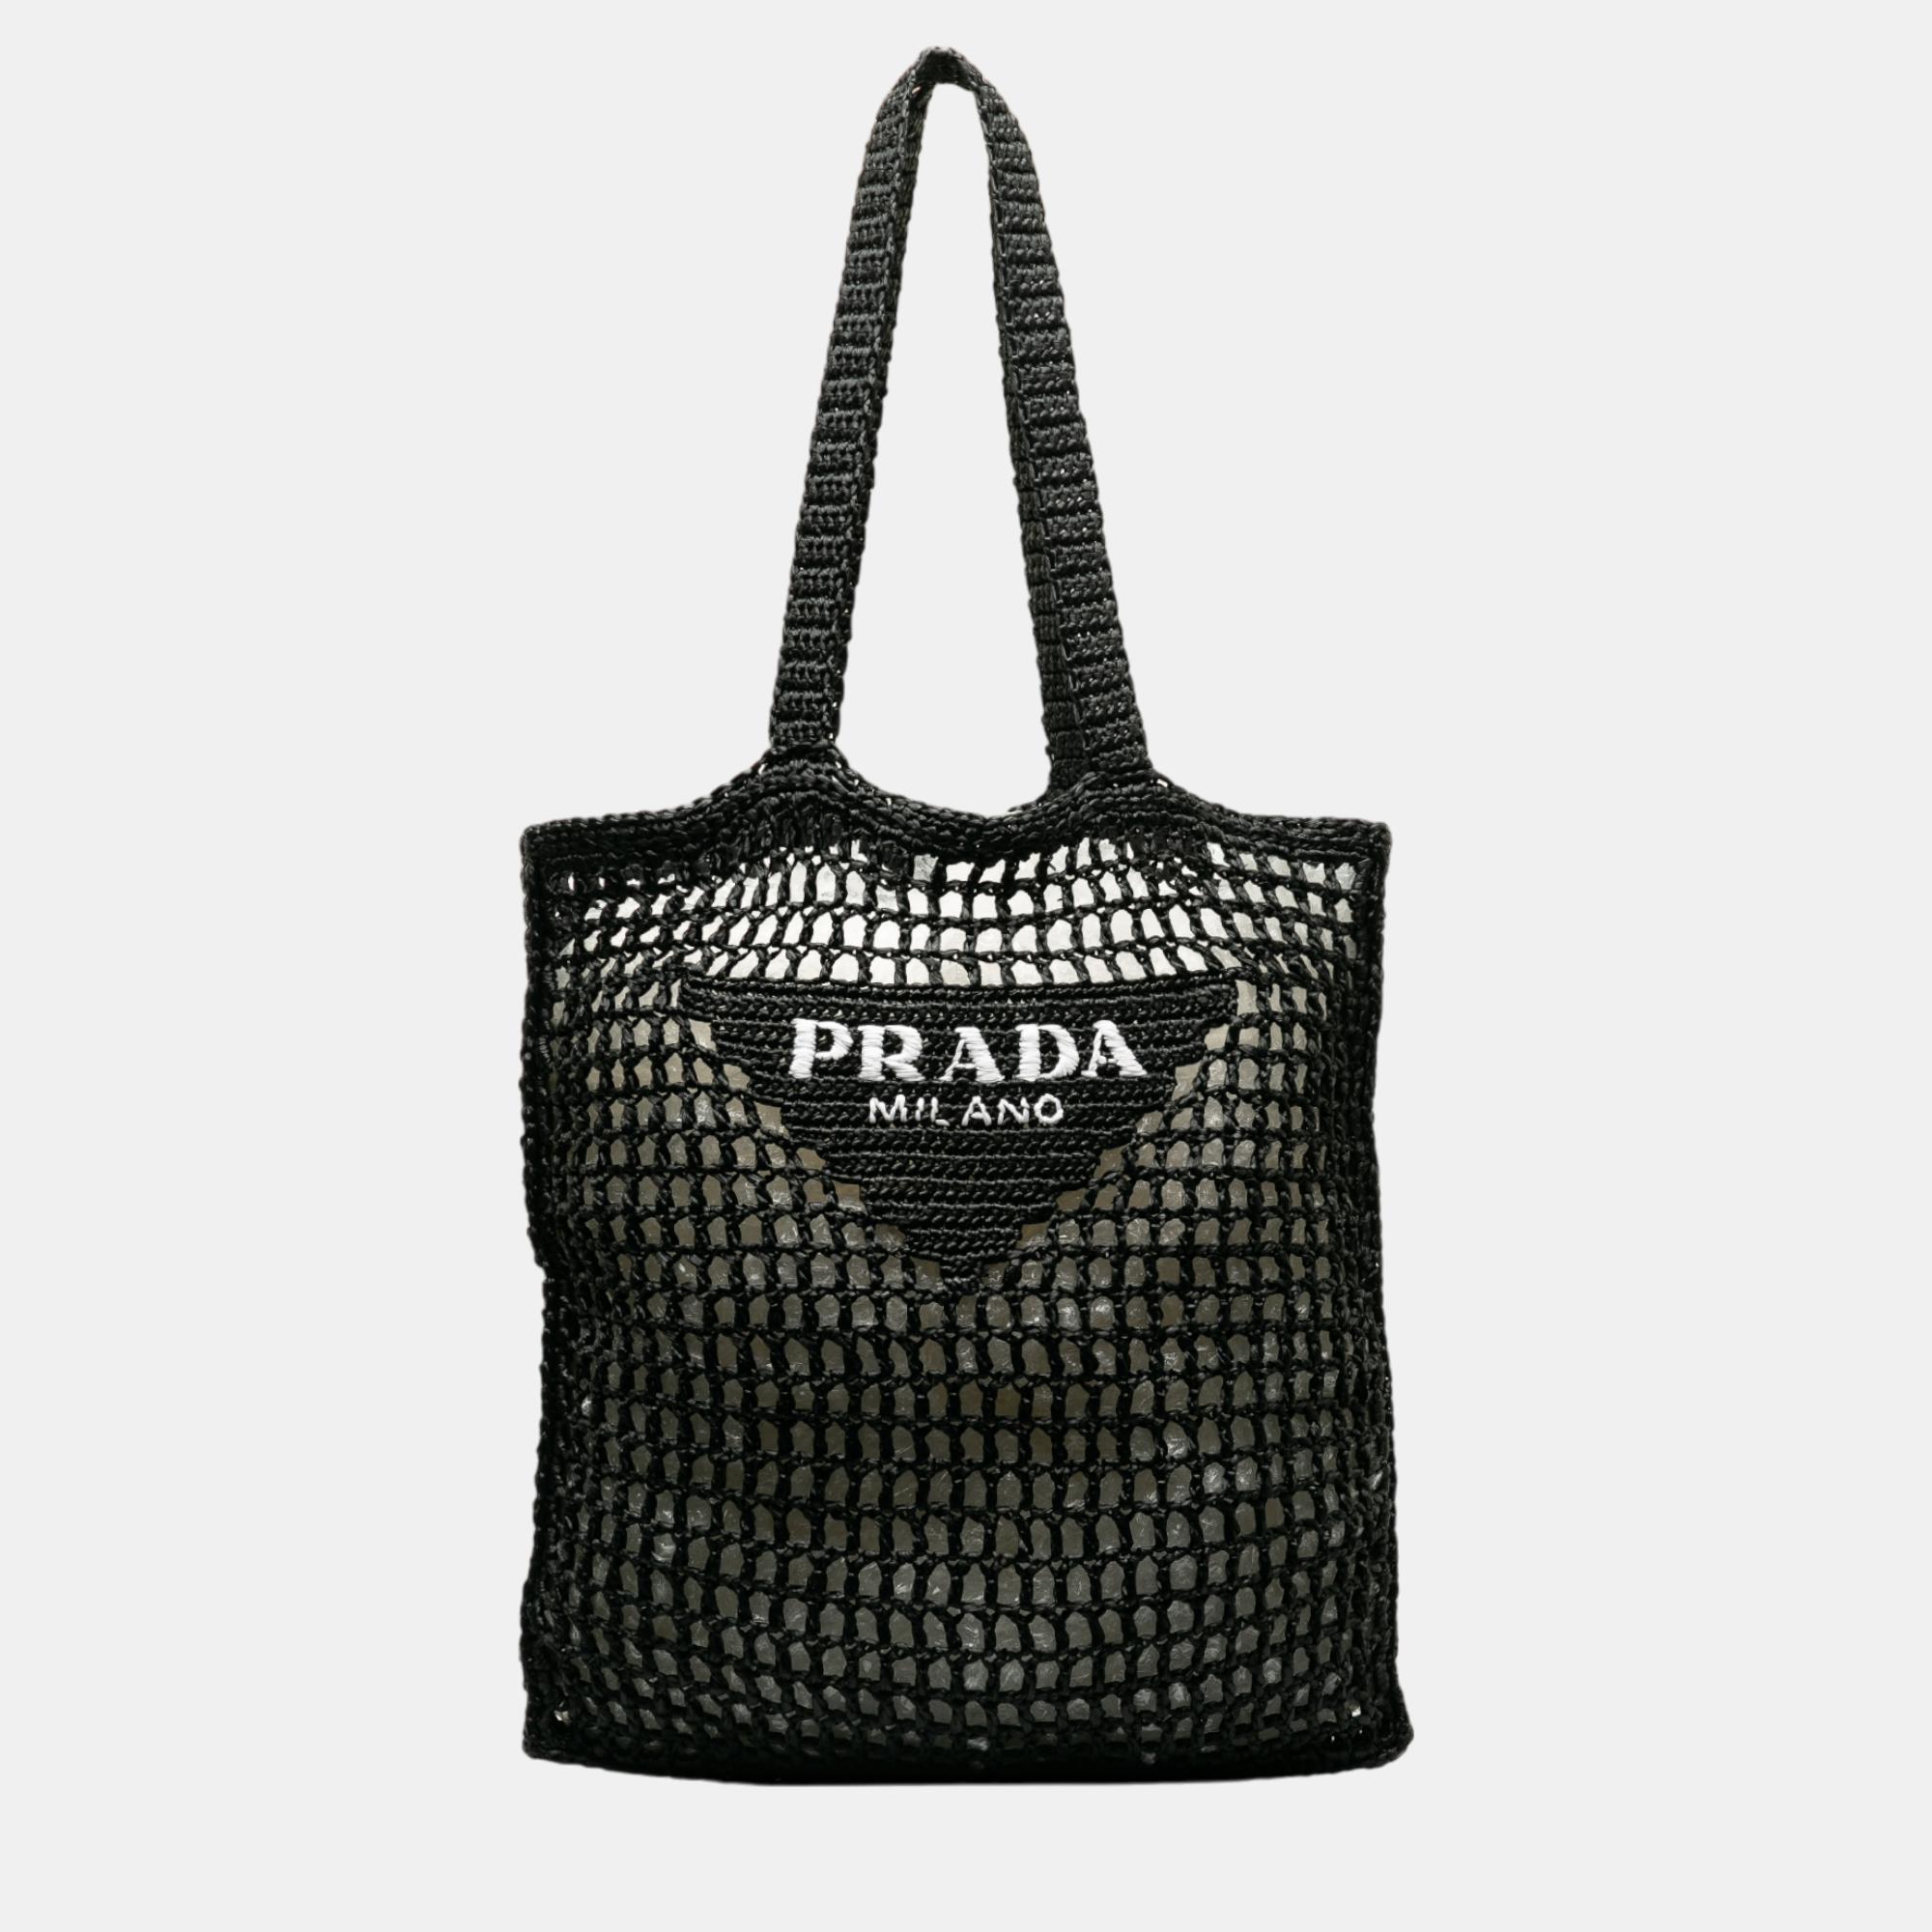 This tote bag features a woven raffia body flat raffia handles and an open top.